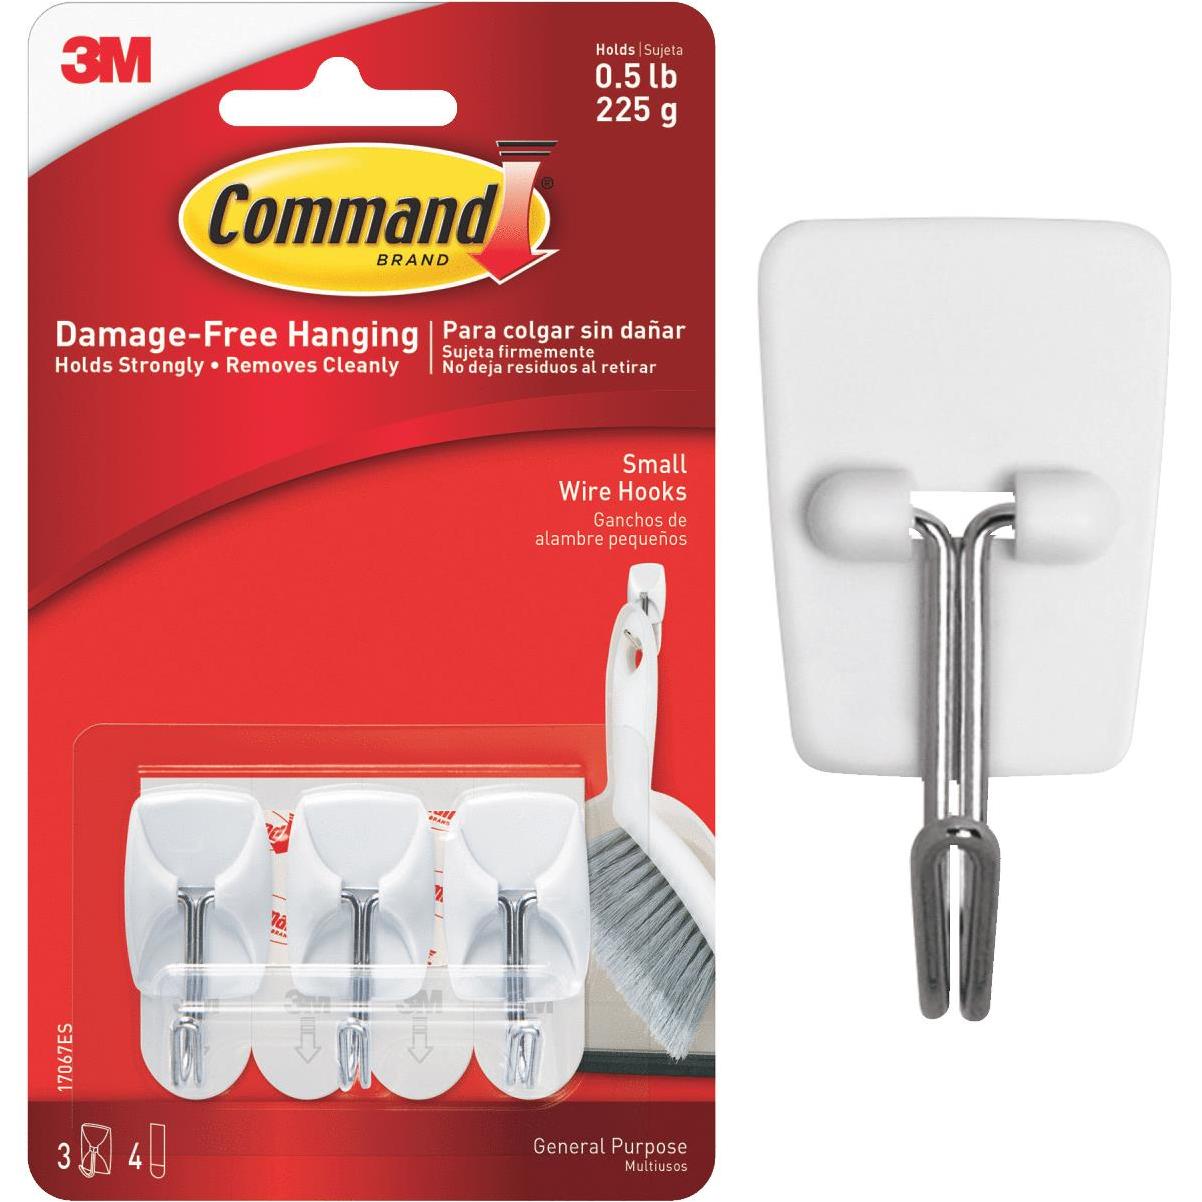 Command Medium Picture Hanging Strips, White, 4 Sets of Strips